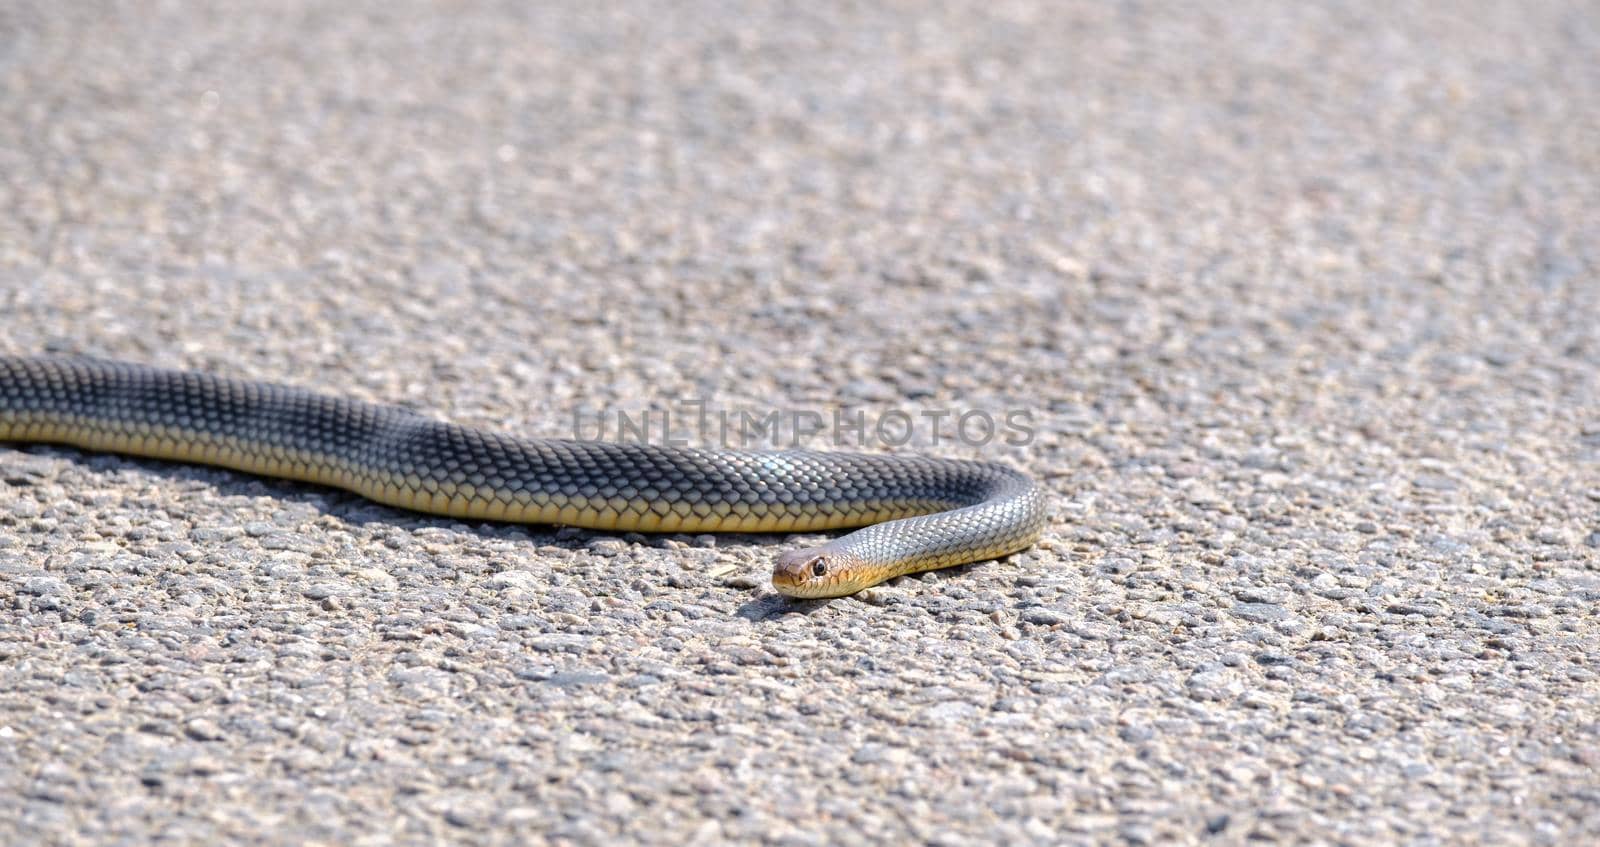 Common Ribbon Snake on the ground. Portrait - close up, small brown snake crawling on the road.